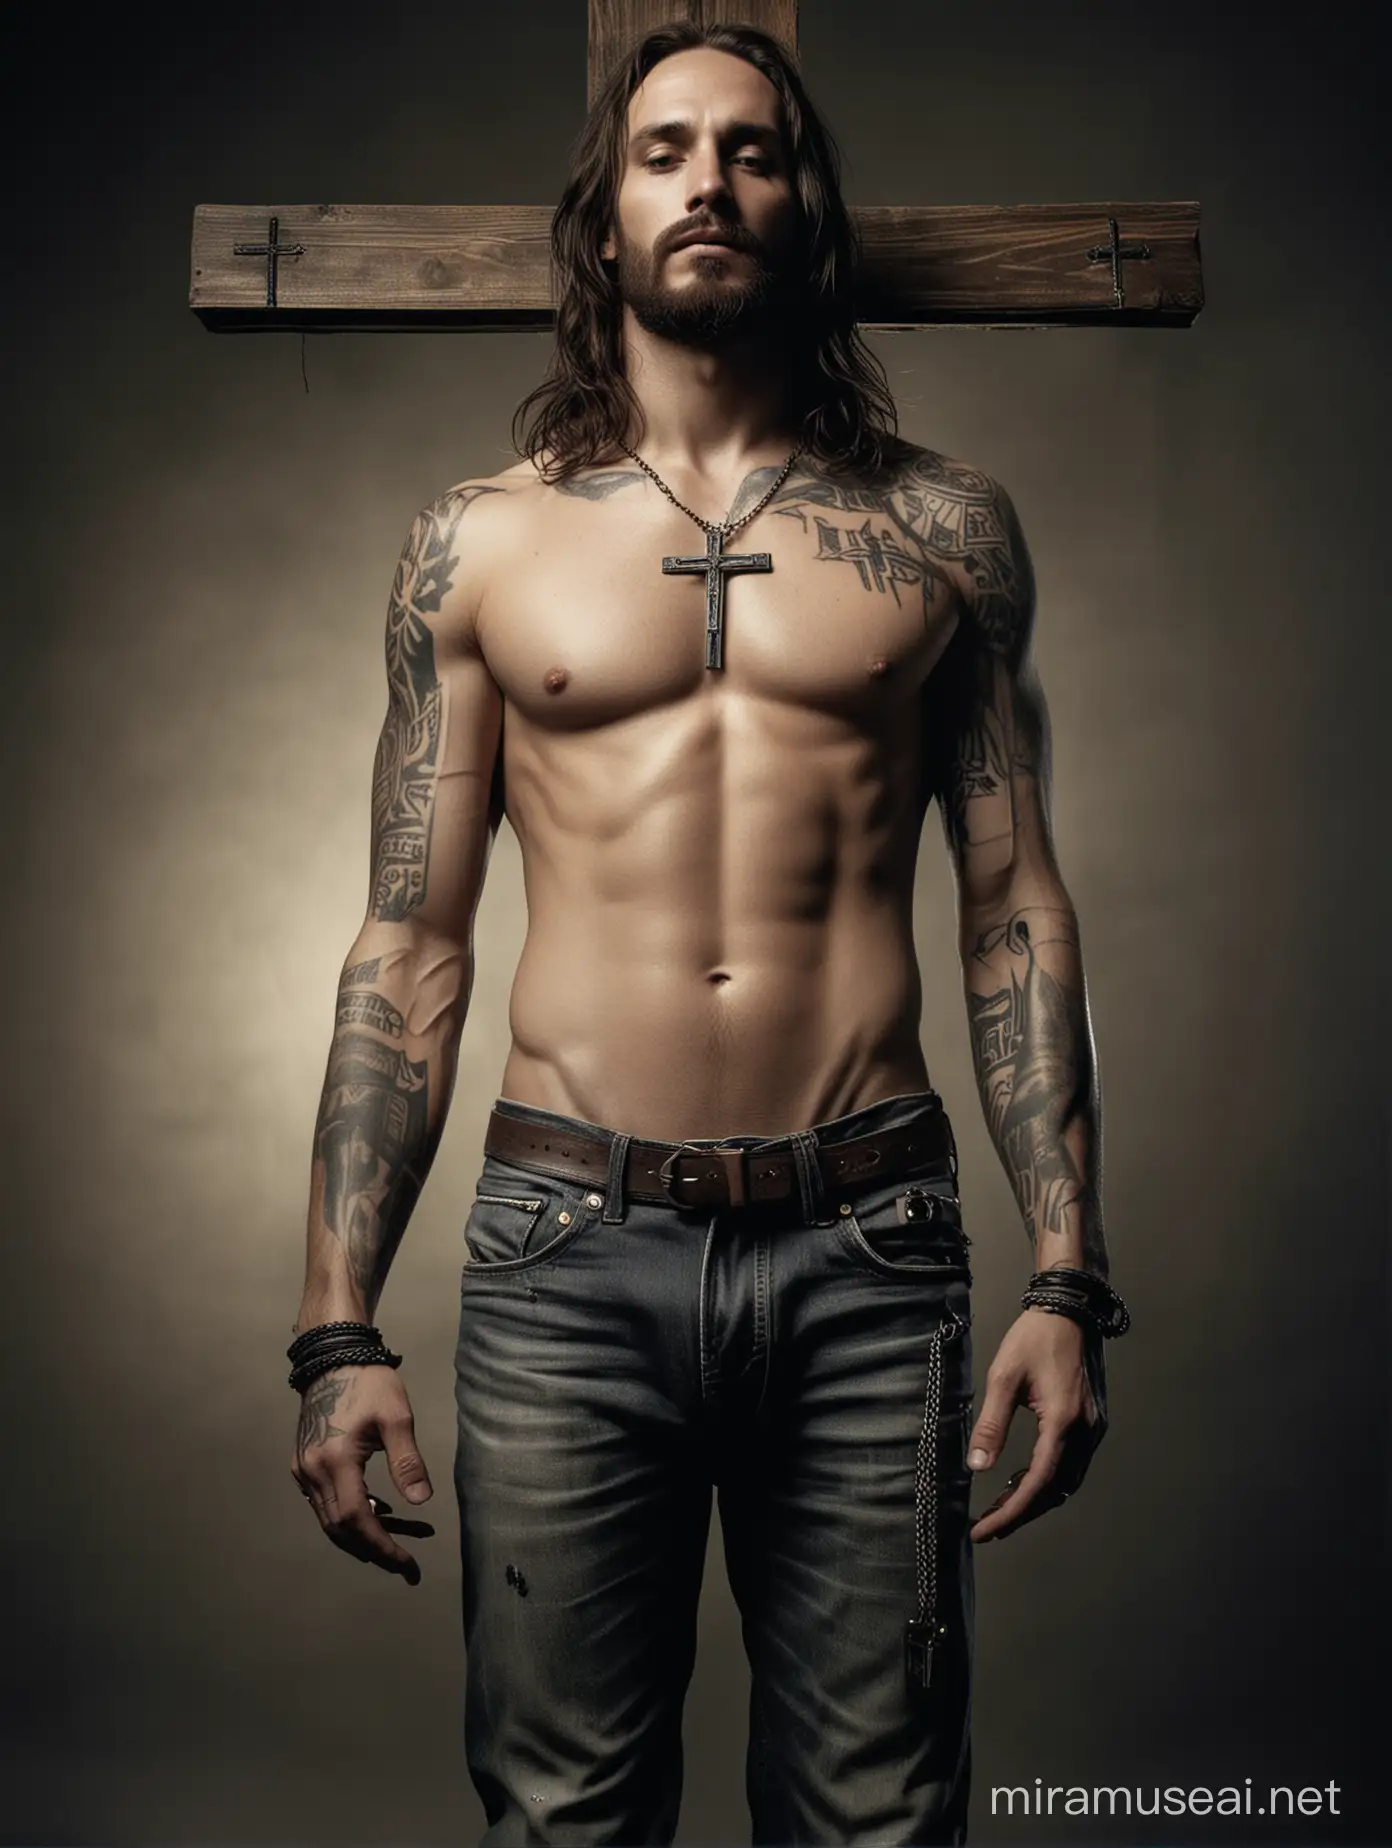 35mm photo of Jesus Christ topless wearing tight jeans, he is sexy and his body shows many Russian gang-style black ink tattoos, and he has a wooden crucifix hanging from his neck, the palms of his hands are bandaged with gauze wrap, cinematographic light, dramatic, beautiful,  high contrast lighting